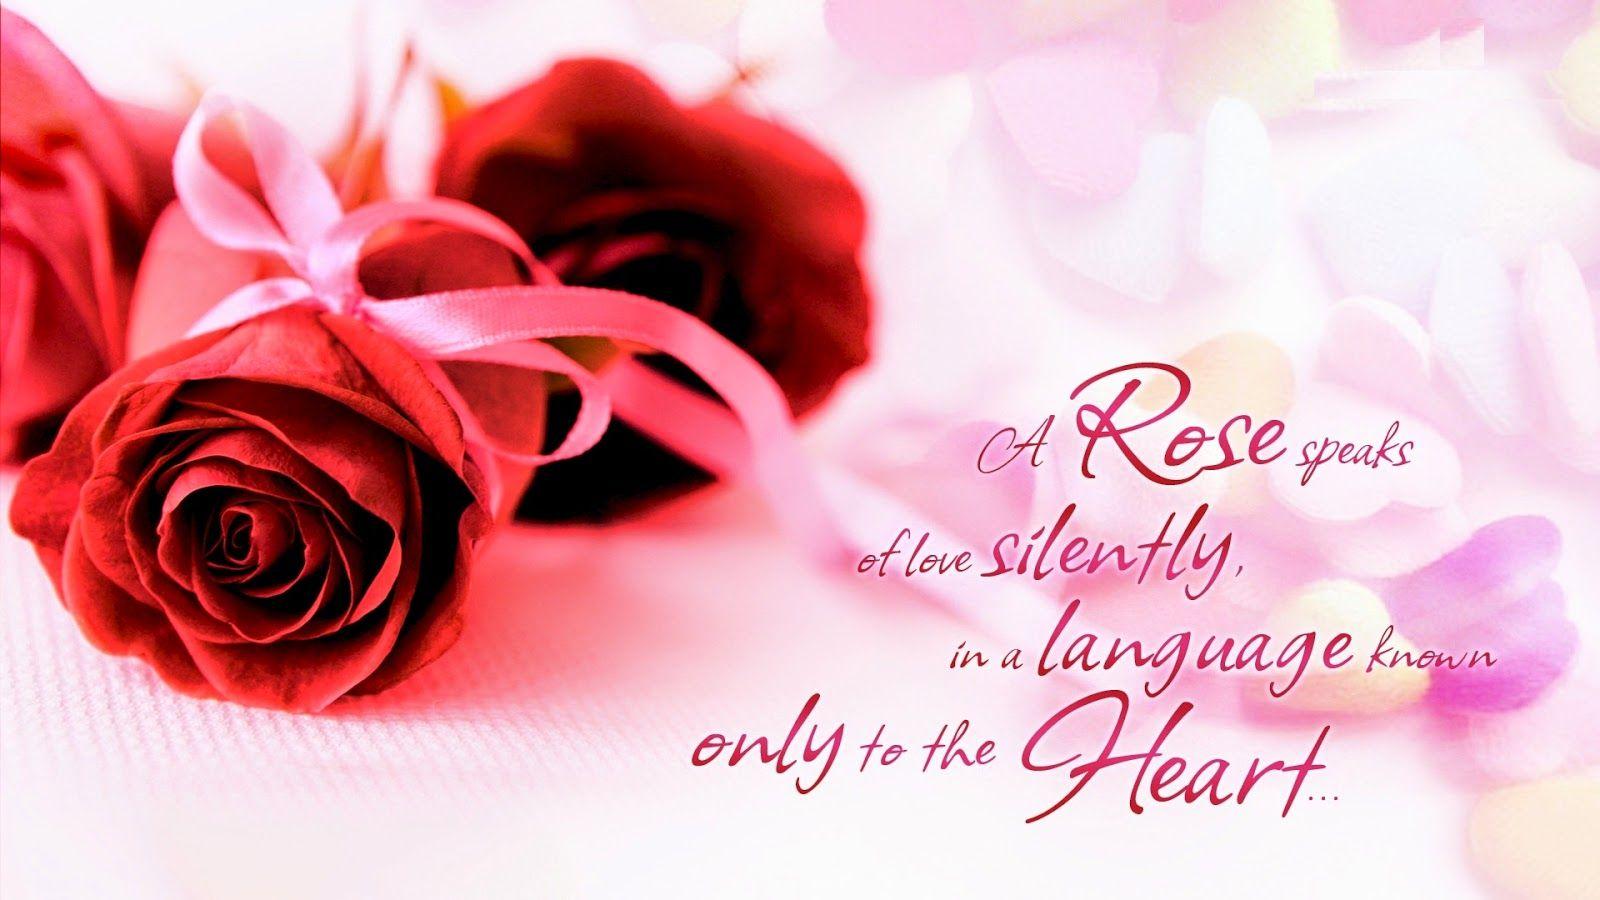 Beautiful love quotes for her with rose flower image